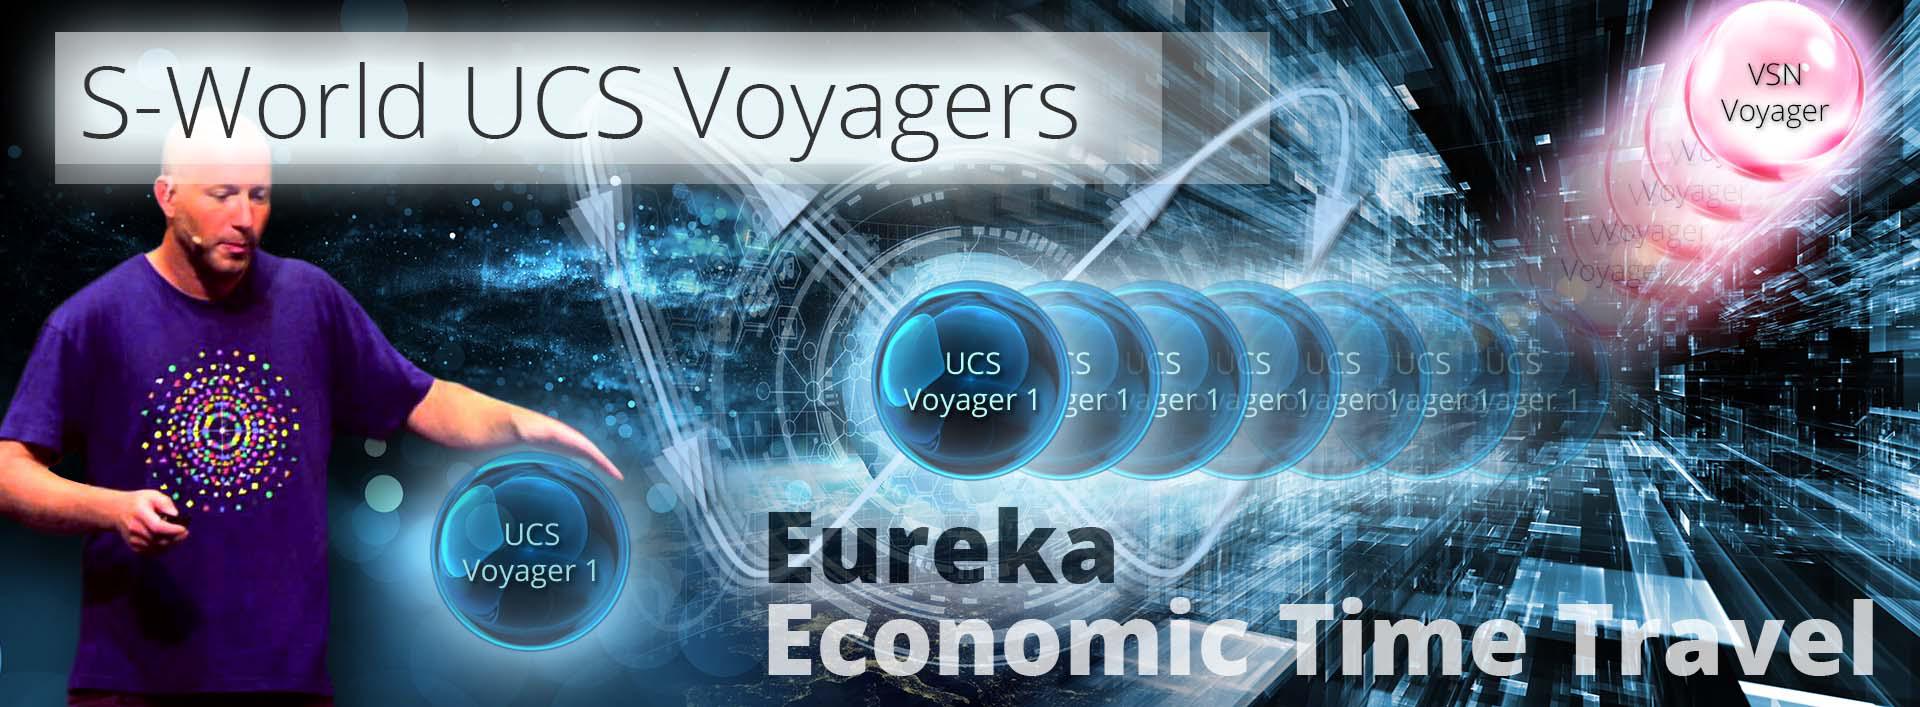 s-world ucs voyagers an economic theory of everything (E-TOE)